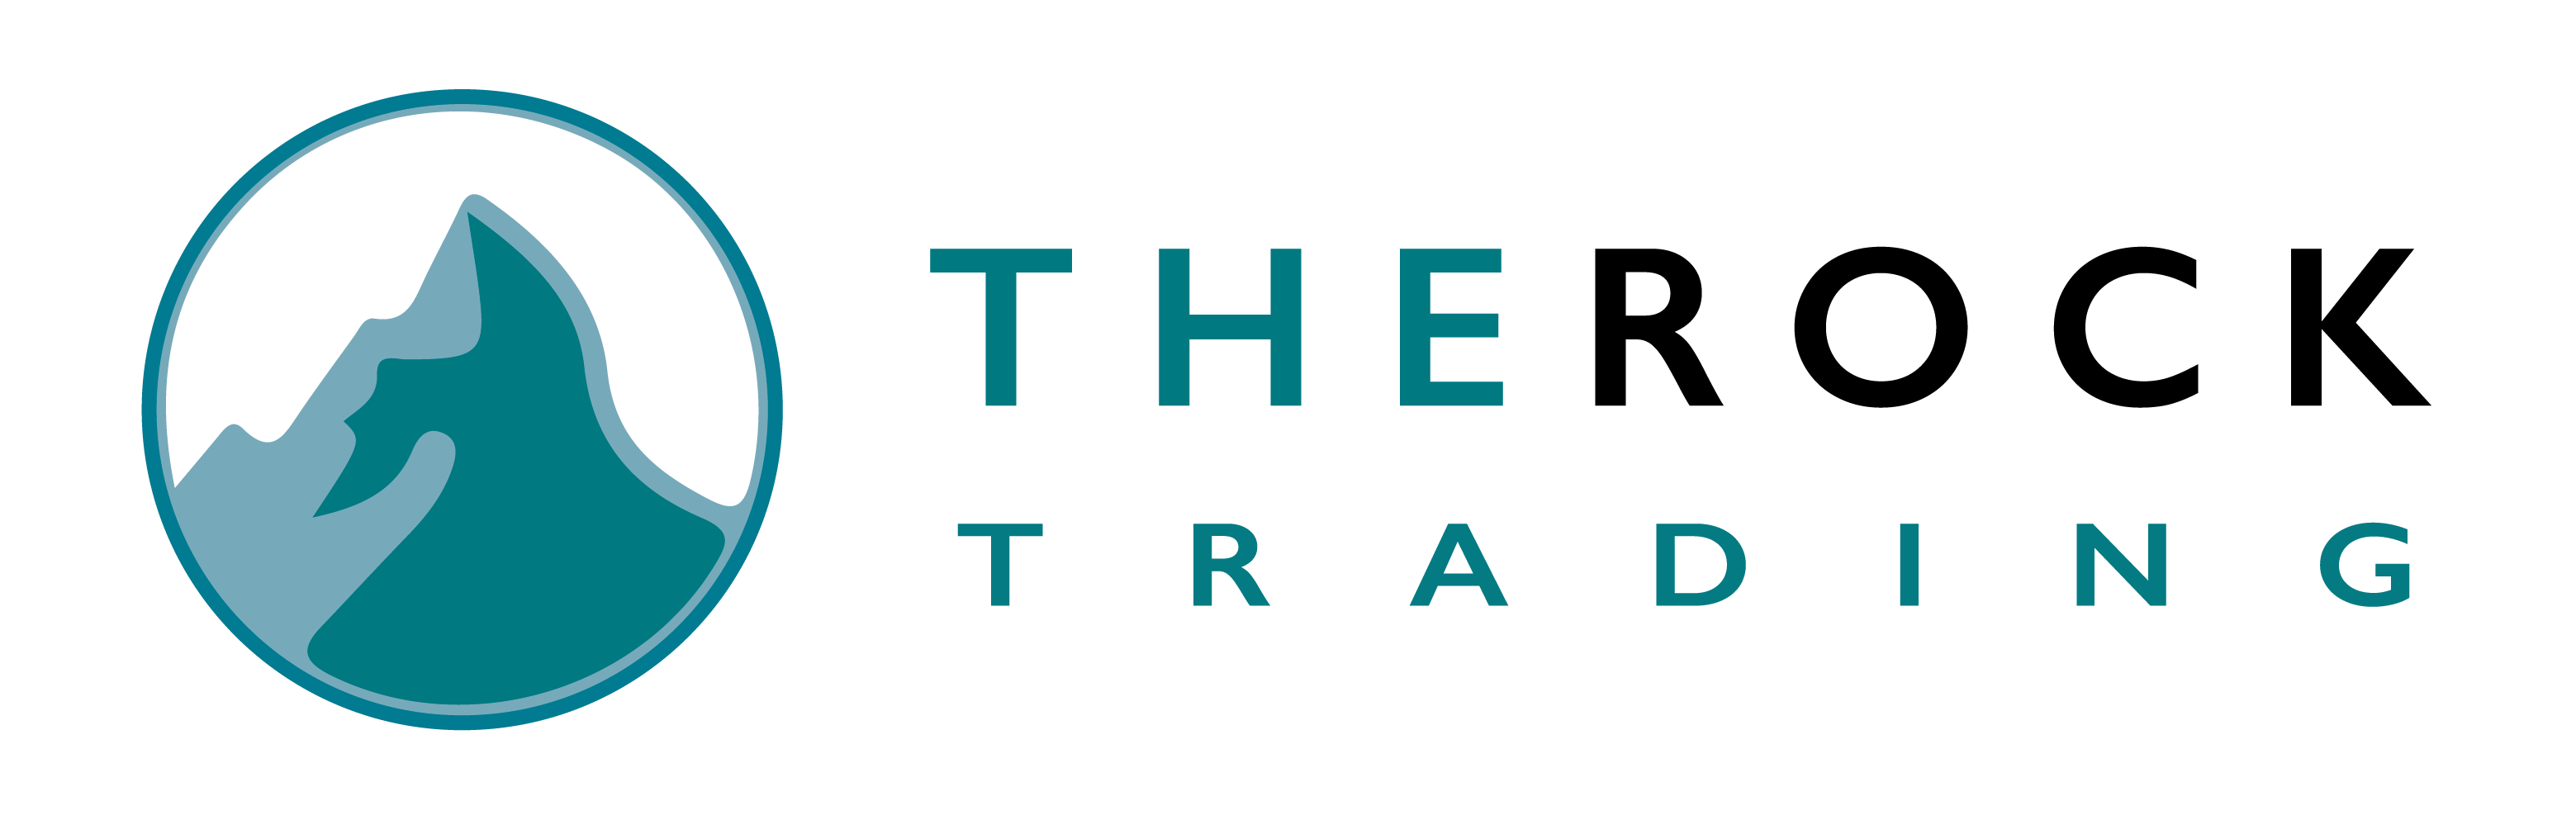 the rock trading srl